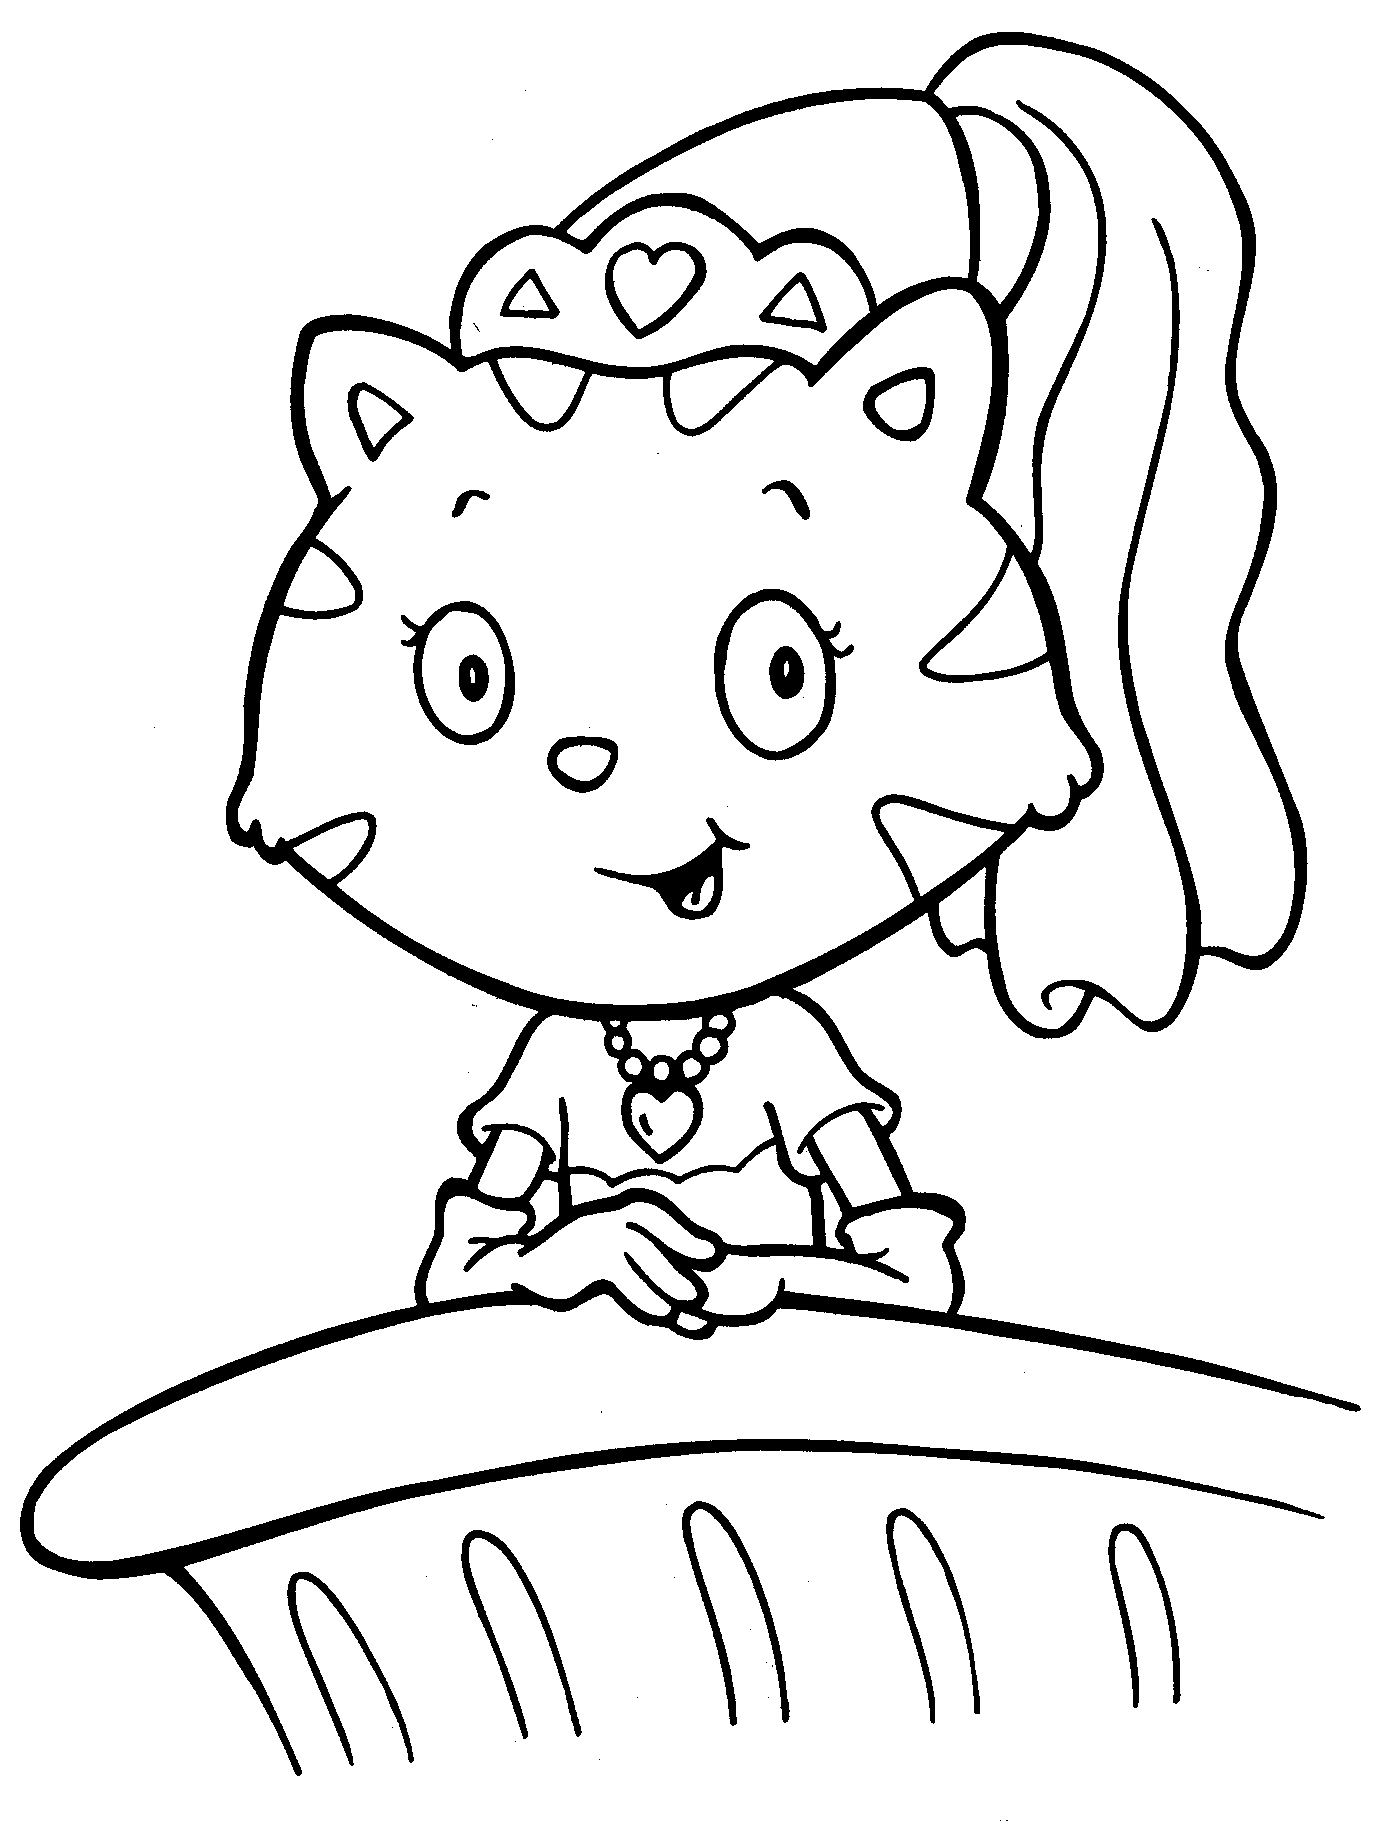 coloring pages of kittens to print kitten coloring pages best coloring pages for kids coloring kittens pages of to print 